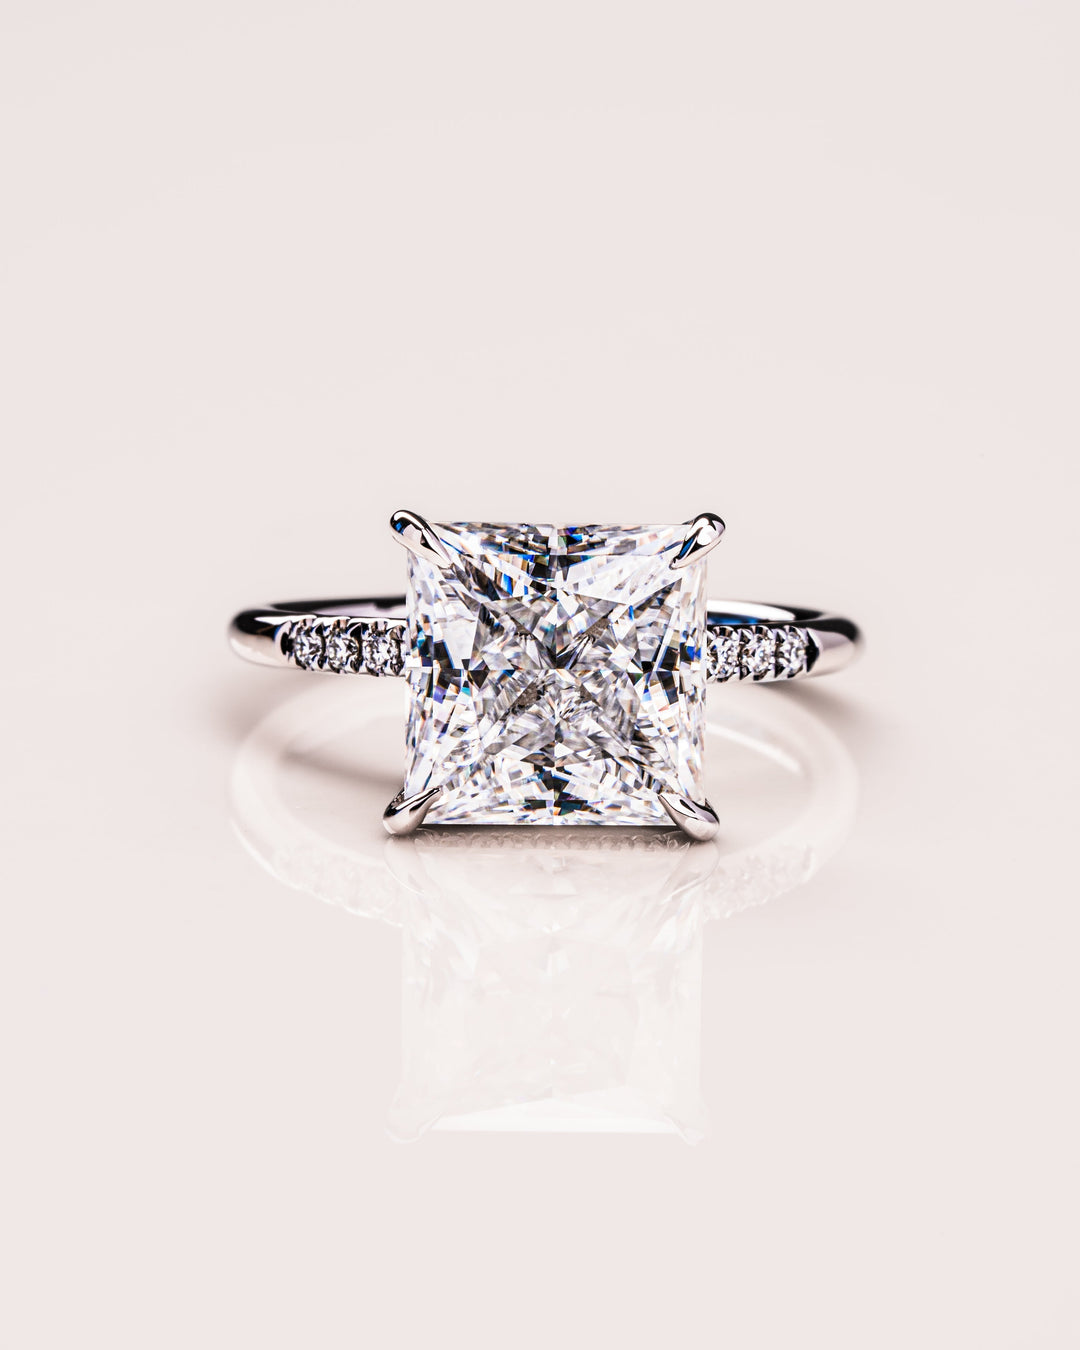 2.87 CT Princess Cut Moissanite Solitaire Engagement Ring With Hidden Halo Setting